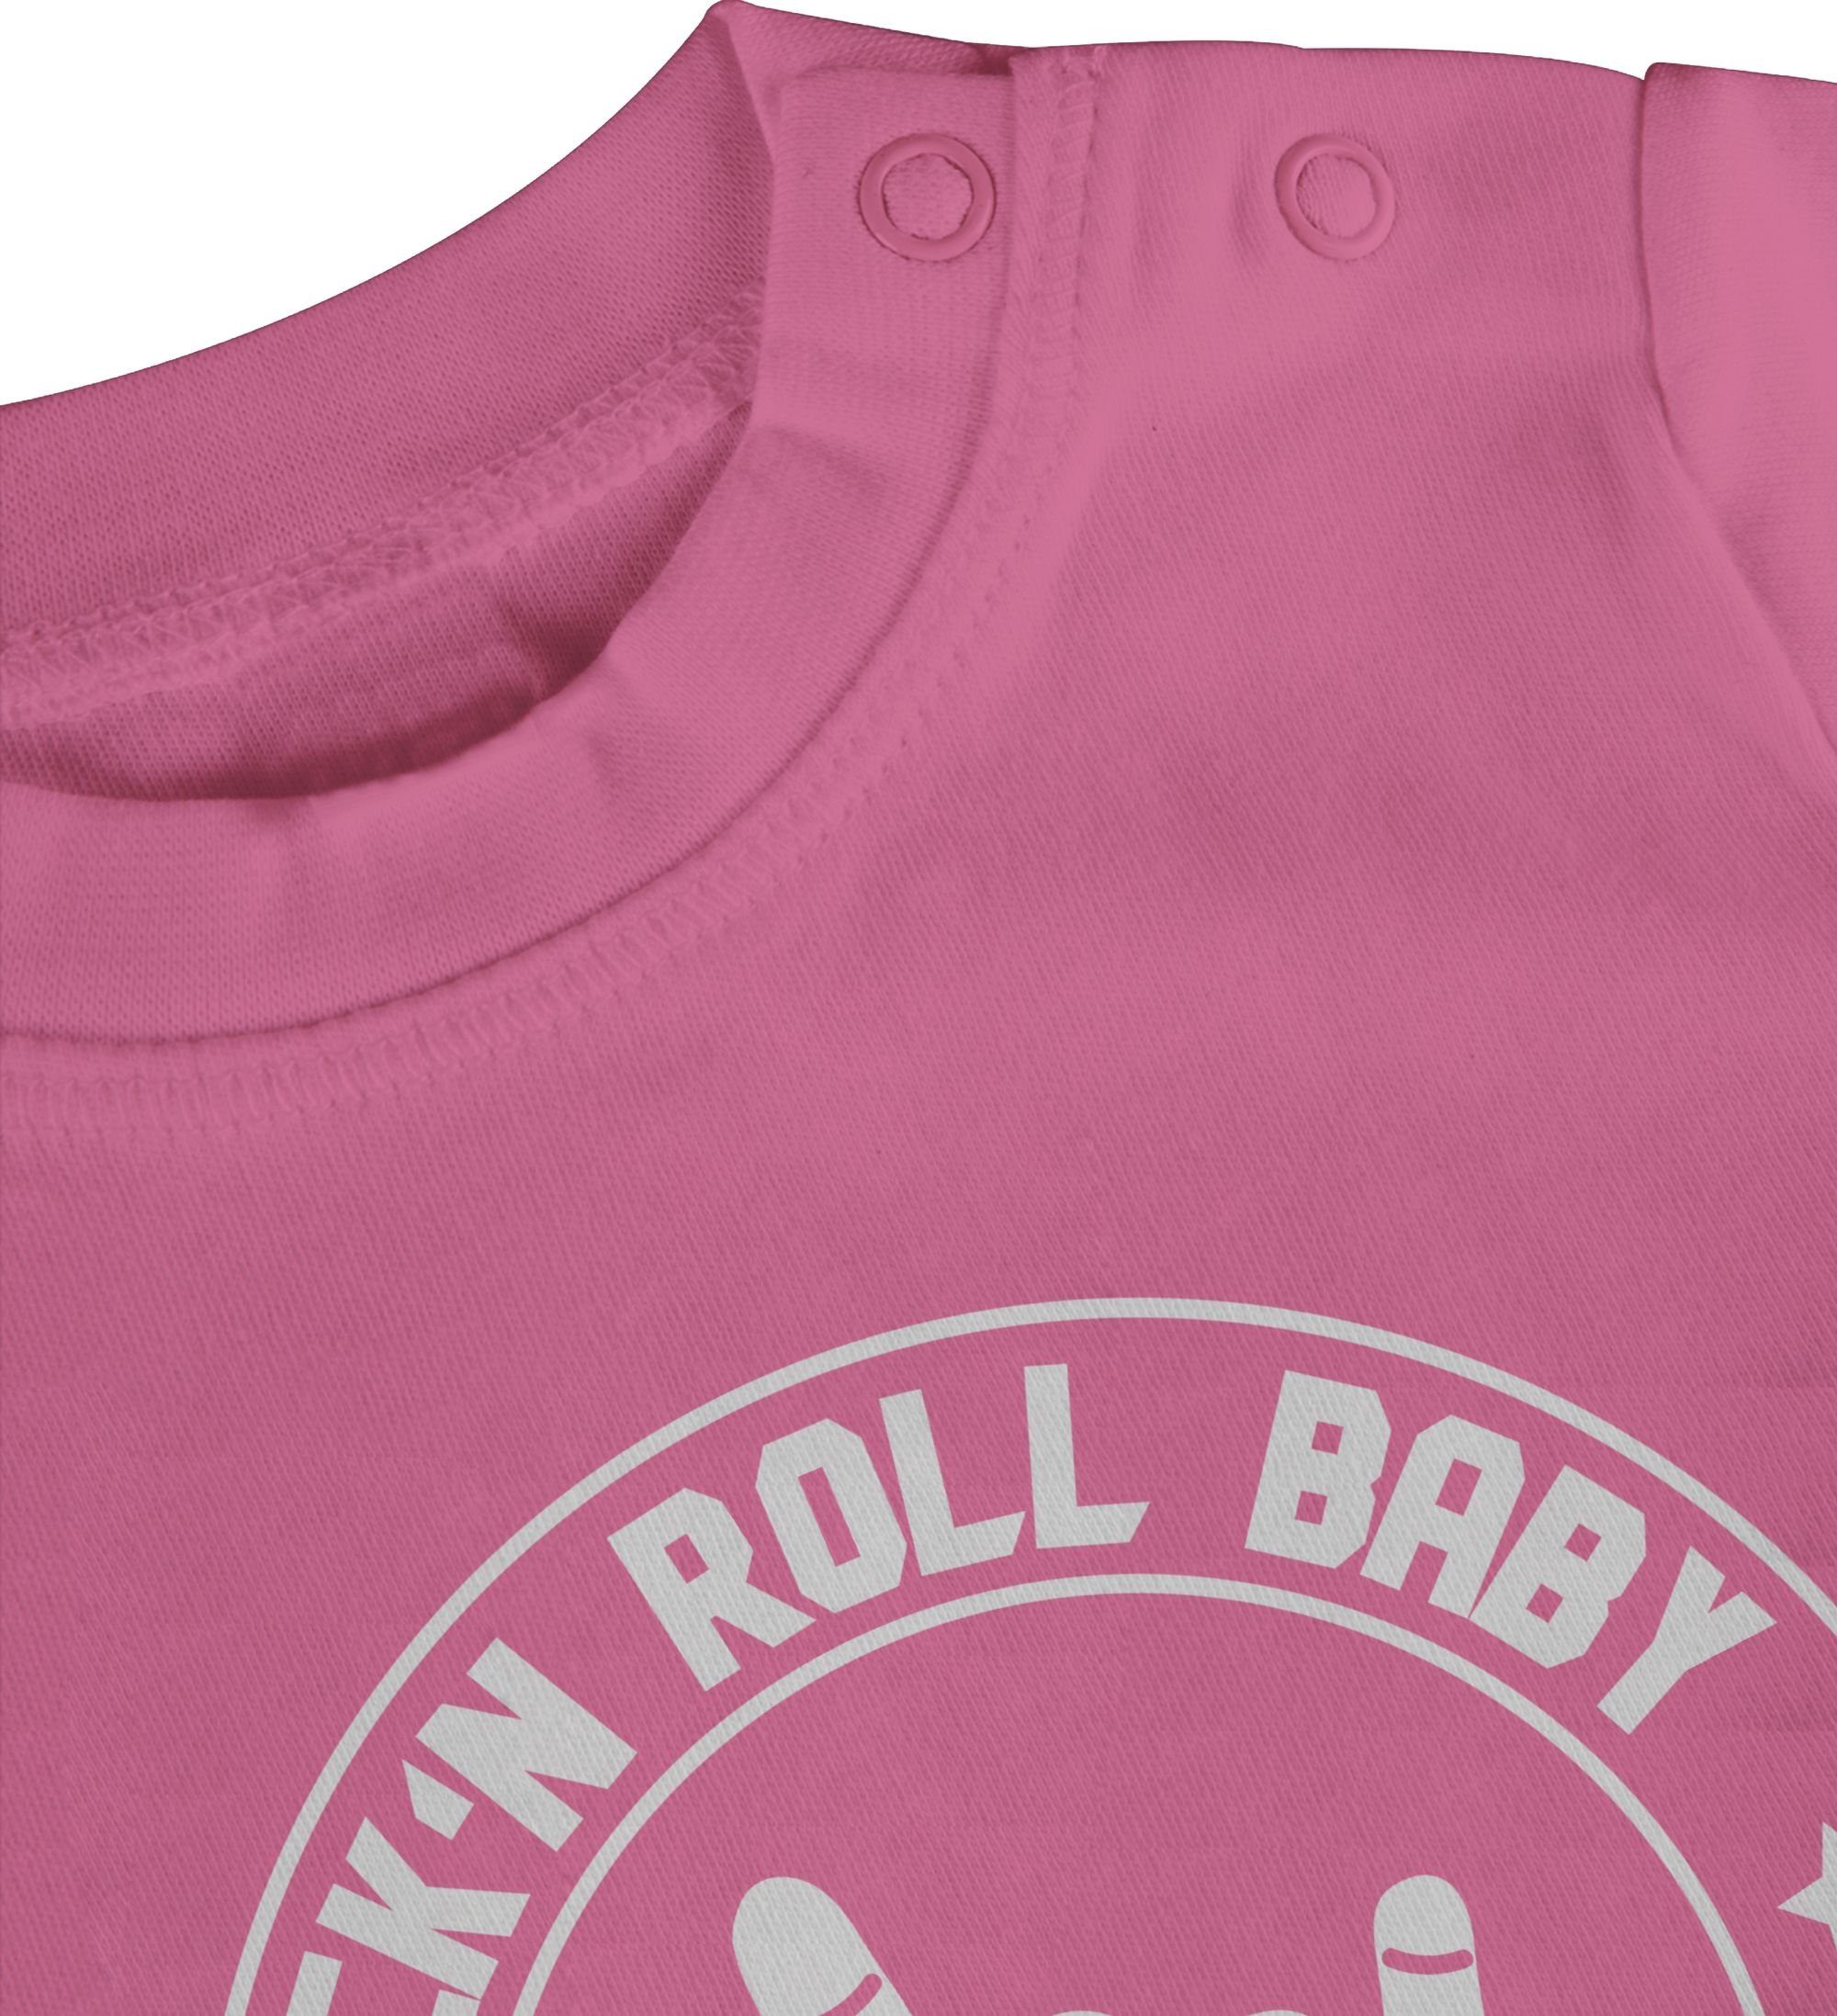 T-Shirt Rock'n Roll Baby 2 2023 Baby Shirtracer since Pink Sprüche